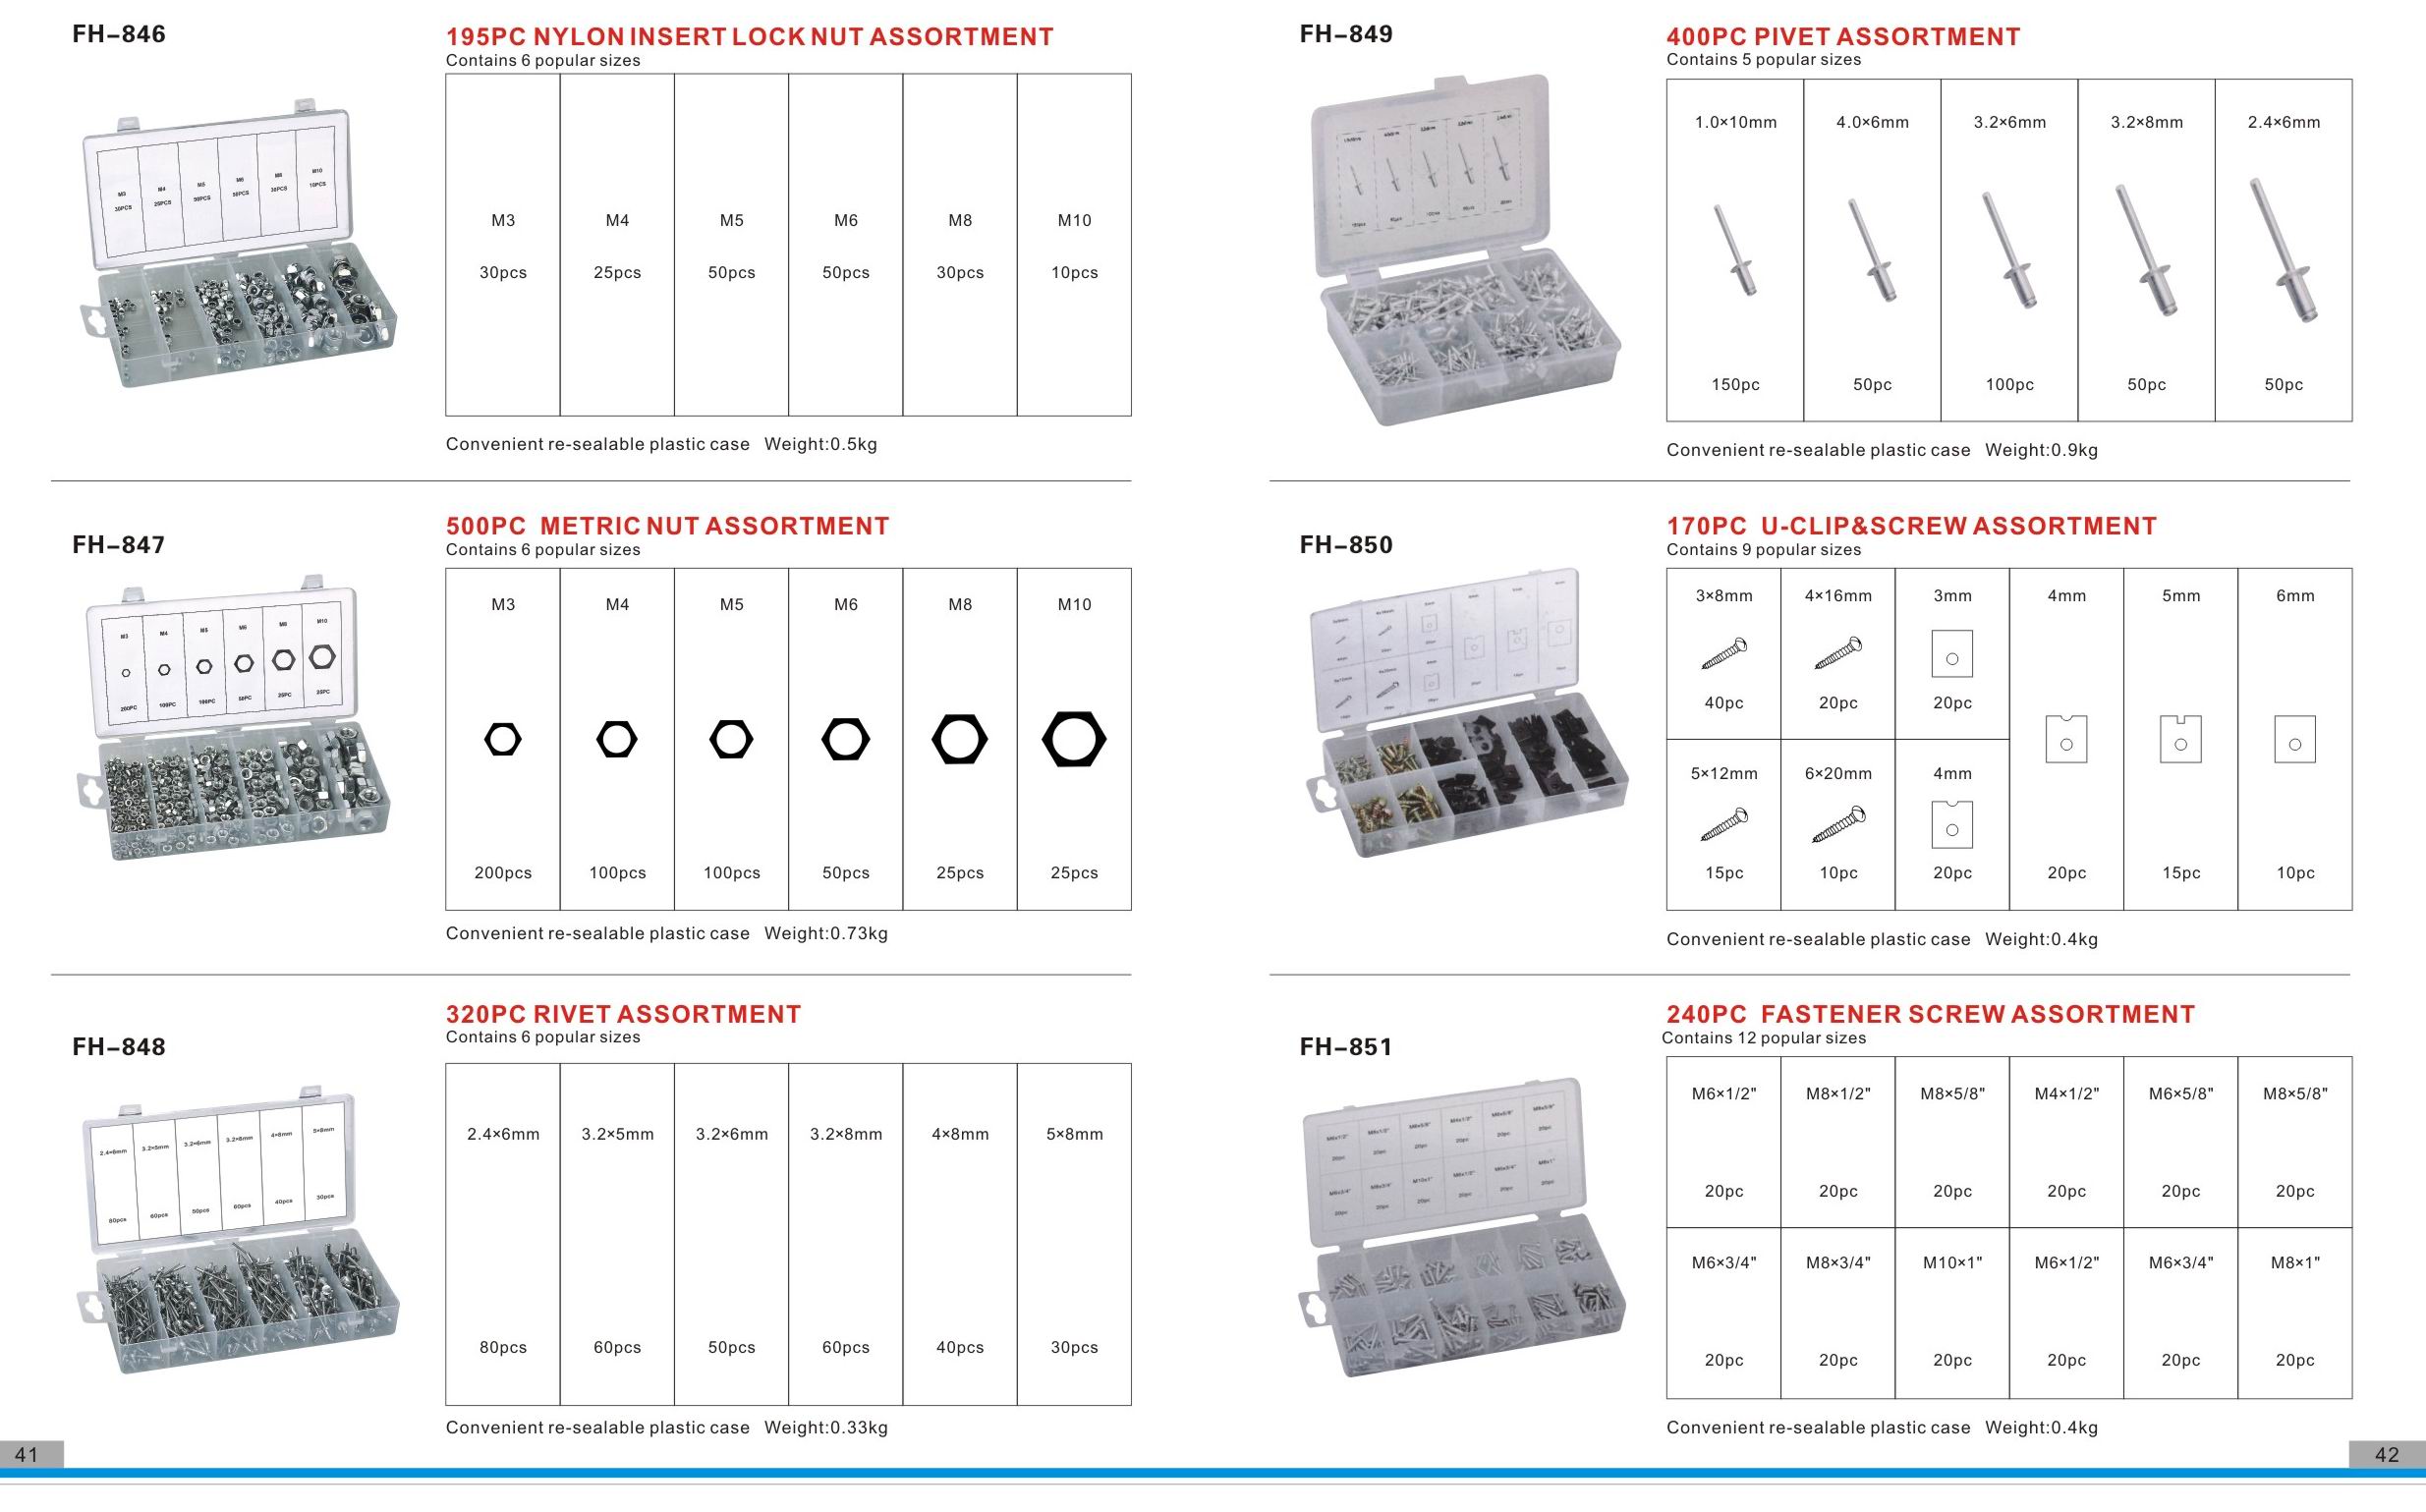 SCREW ASSORTMENT AND OTHERS